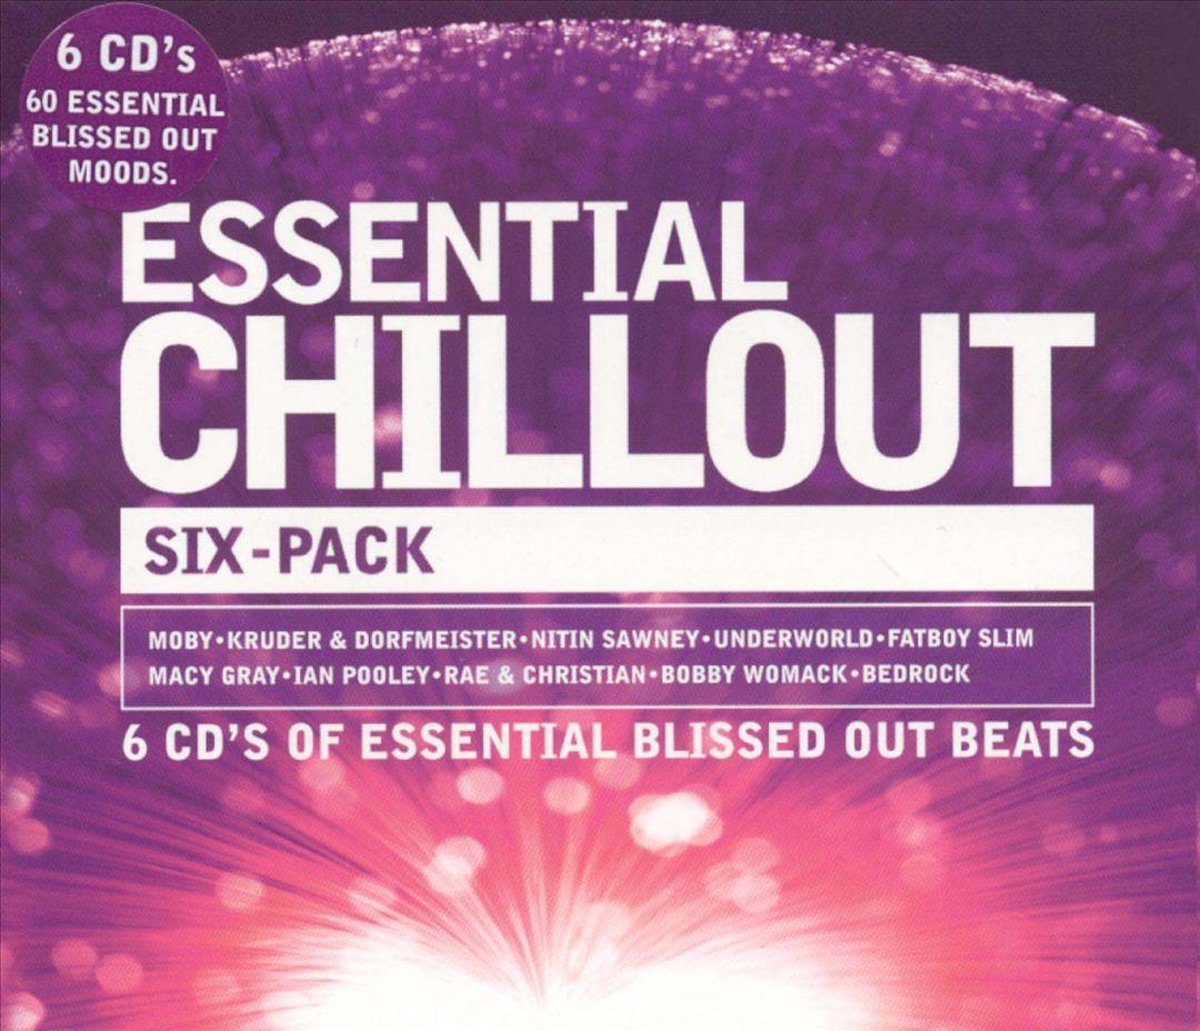 Essential Chillout - various artists